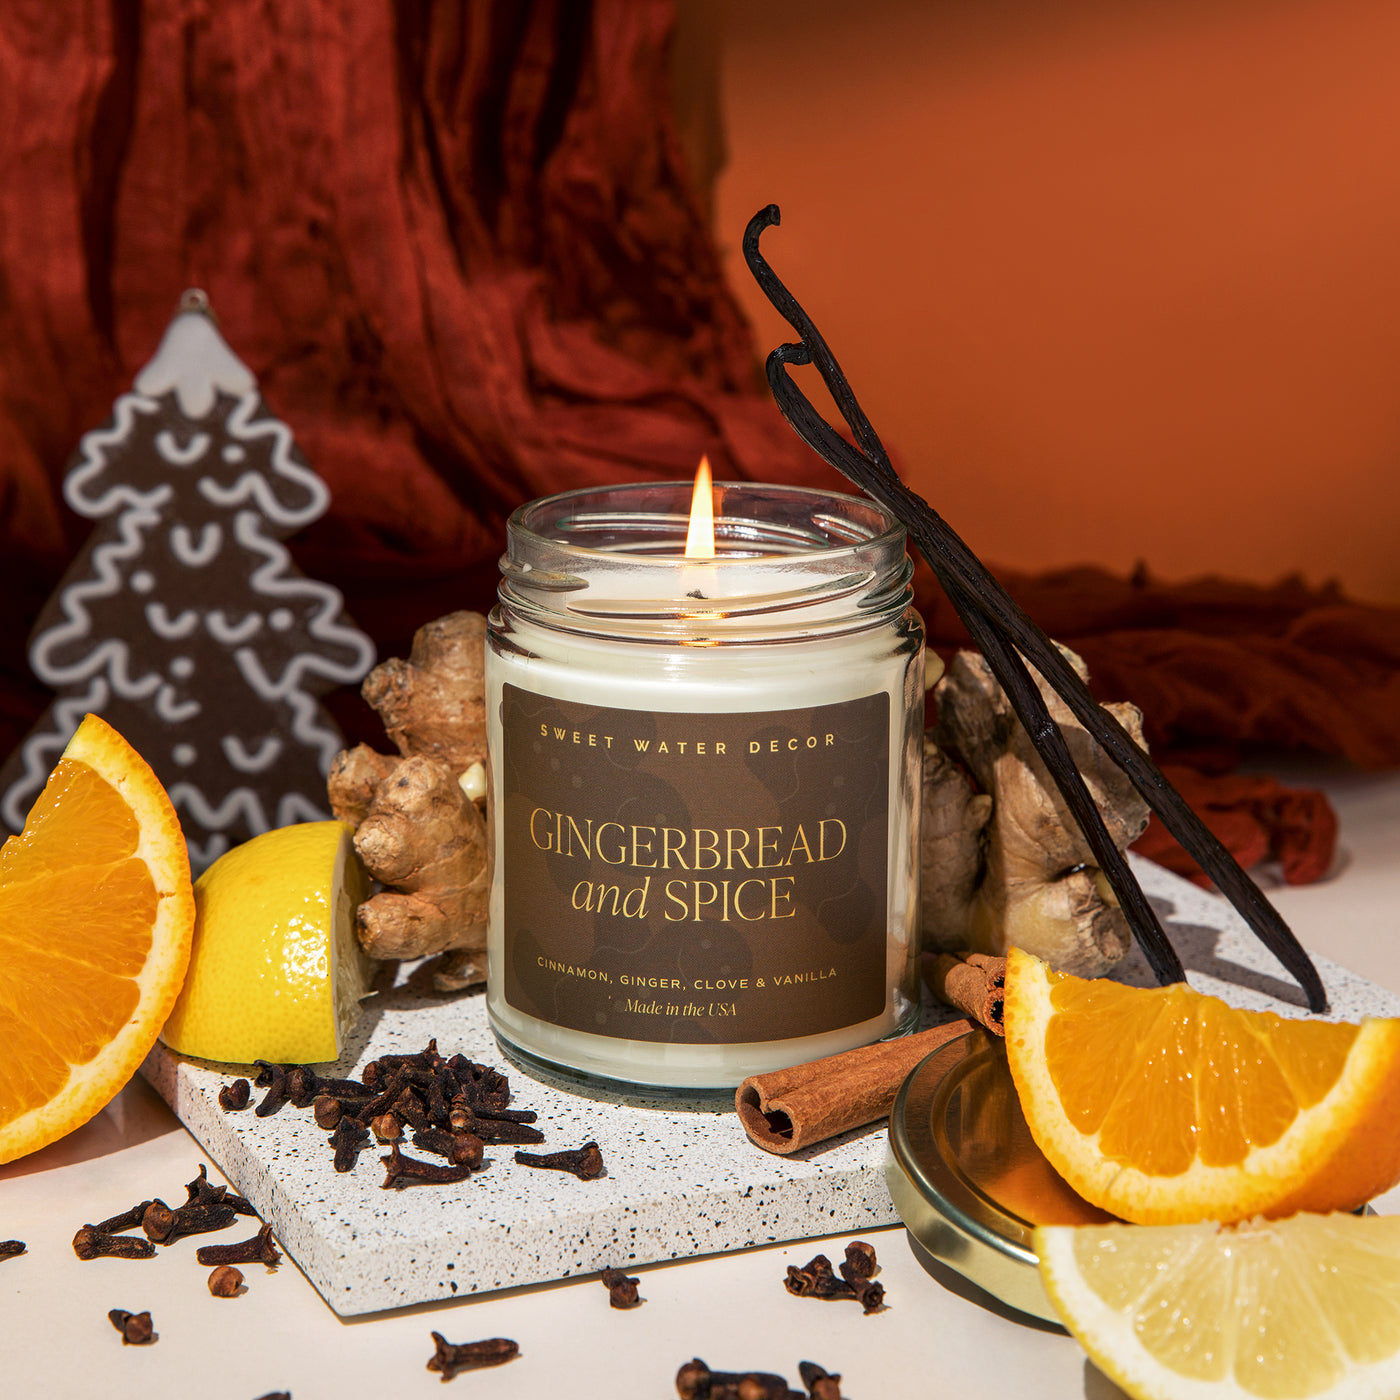 Gingerbread and Spice Soy Candle - Clear Jar - 9 oz